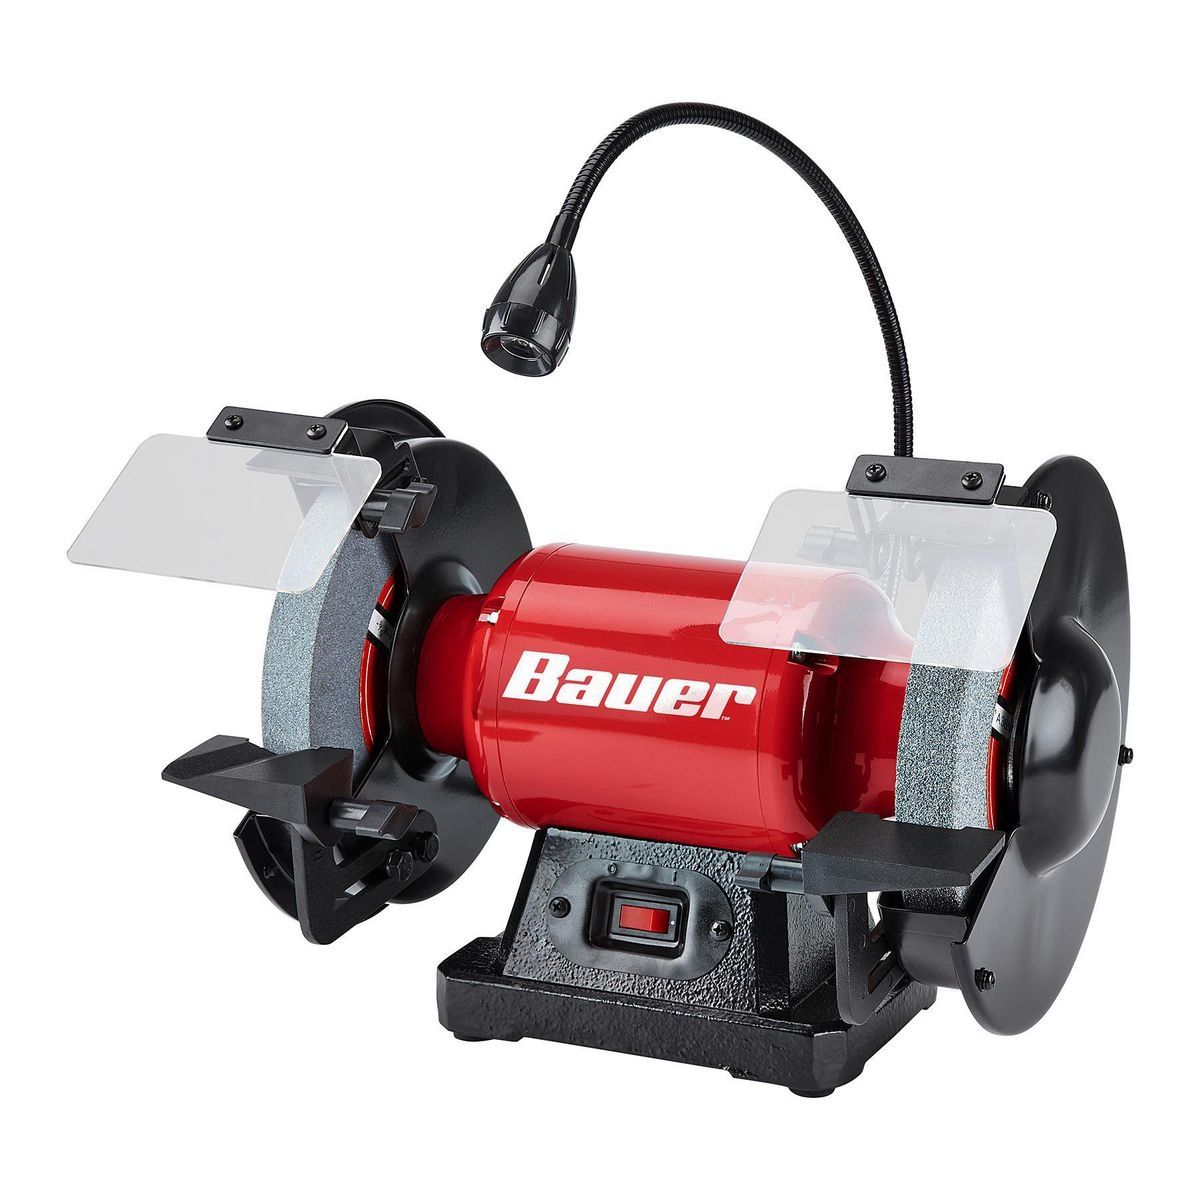 BAUER 8 in. Bench Grinder with LED Light